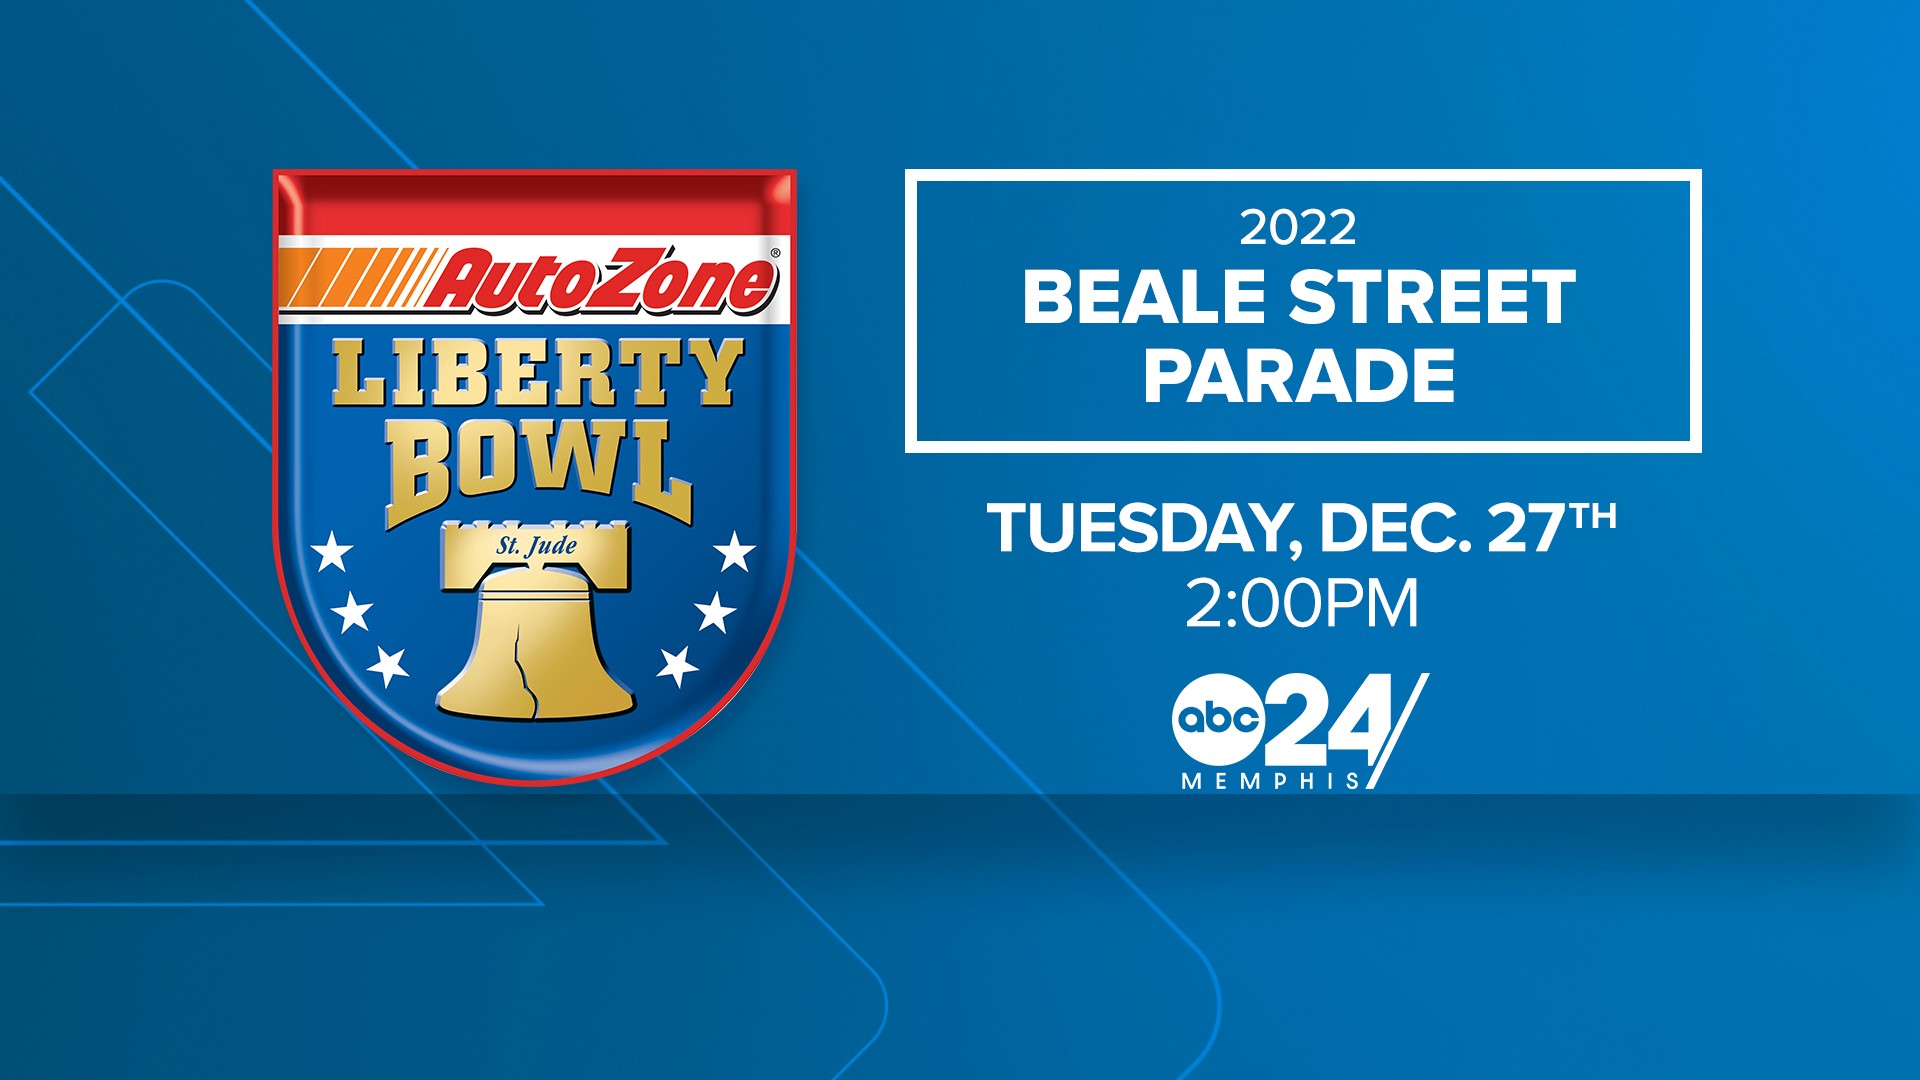 The parade starts at 2pm and will follow a path down world famous Beale Street in Downtown Memphis. You can watch the parade live on ABC24 and at abc24.com/watch.